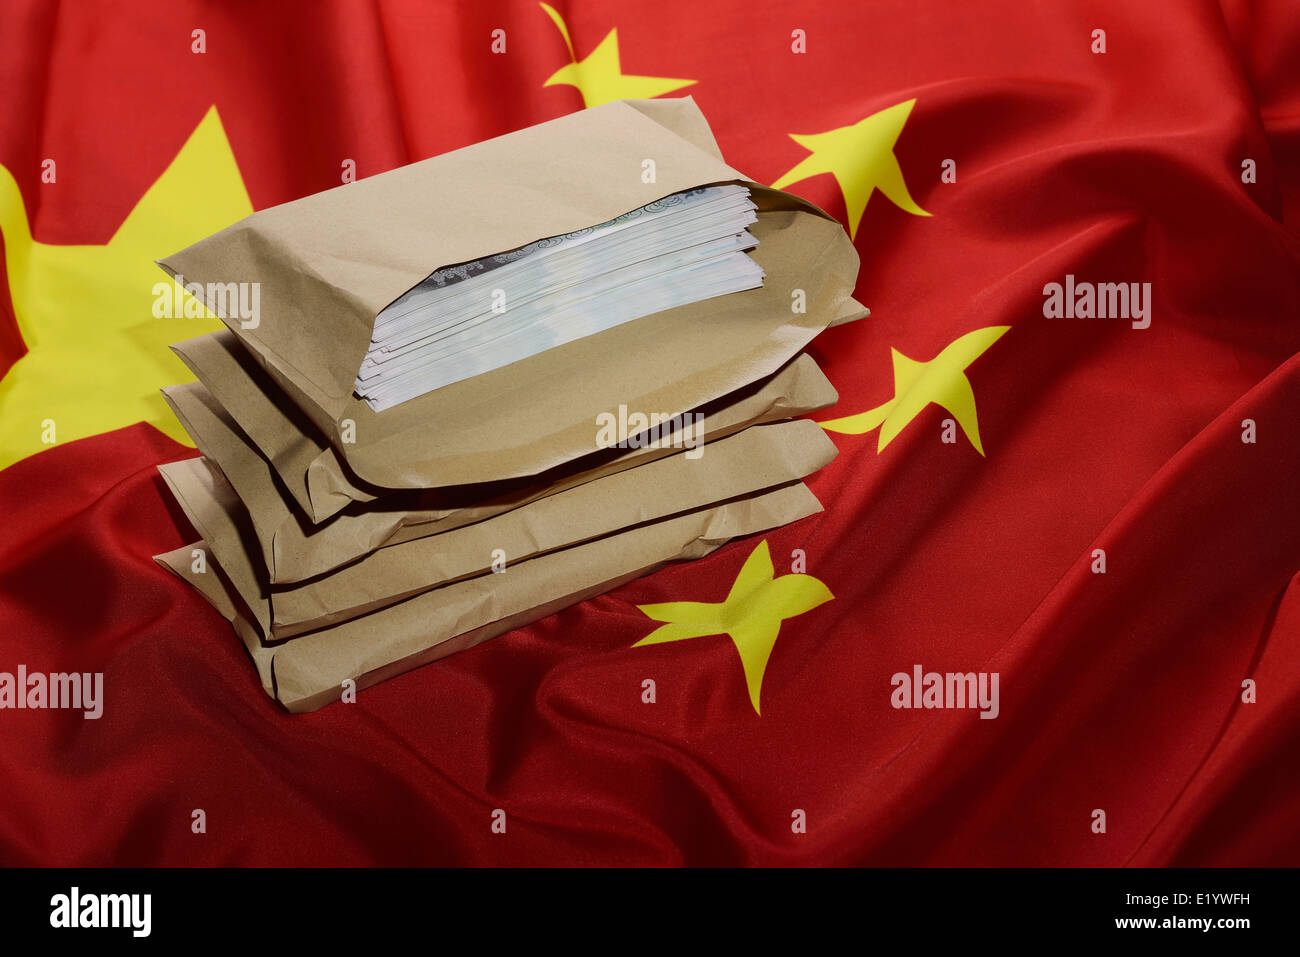 China flag with brown envelopes full of money Stock Photo